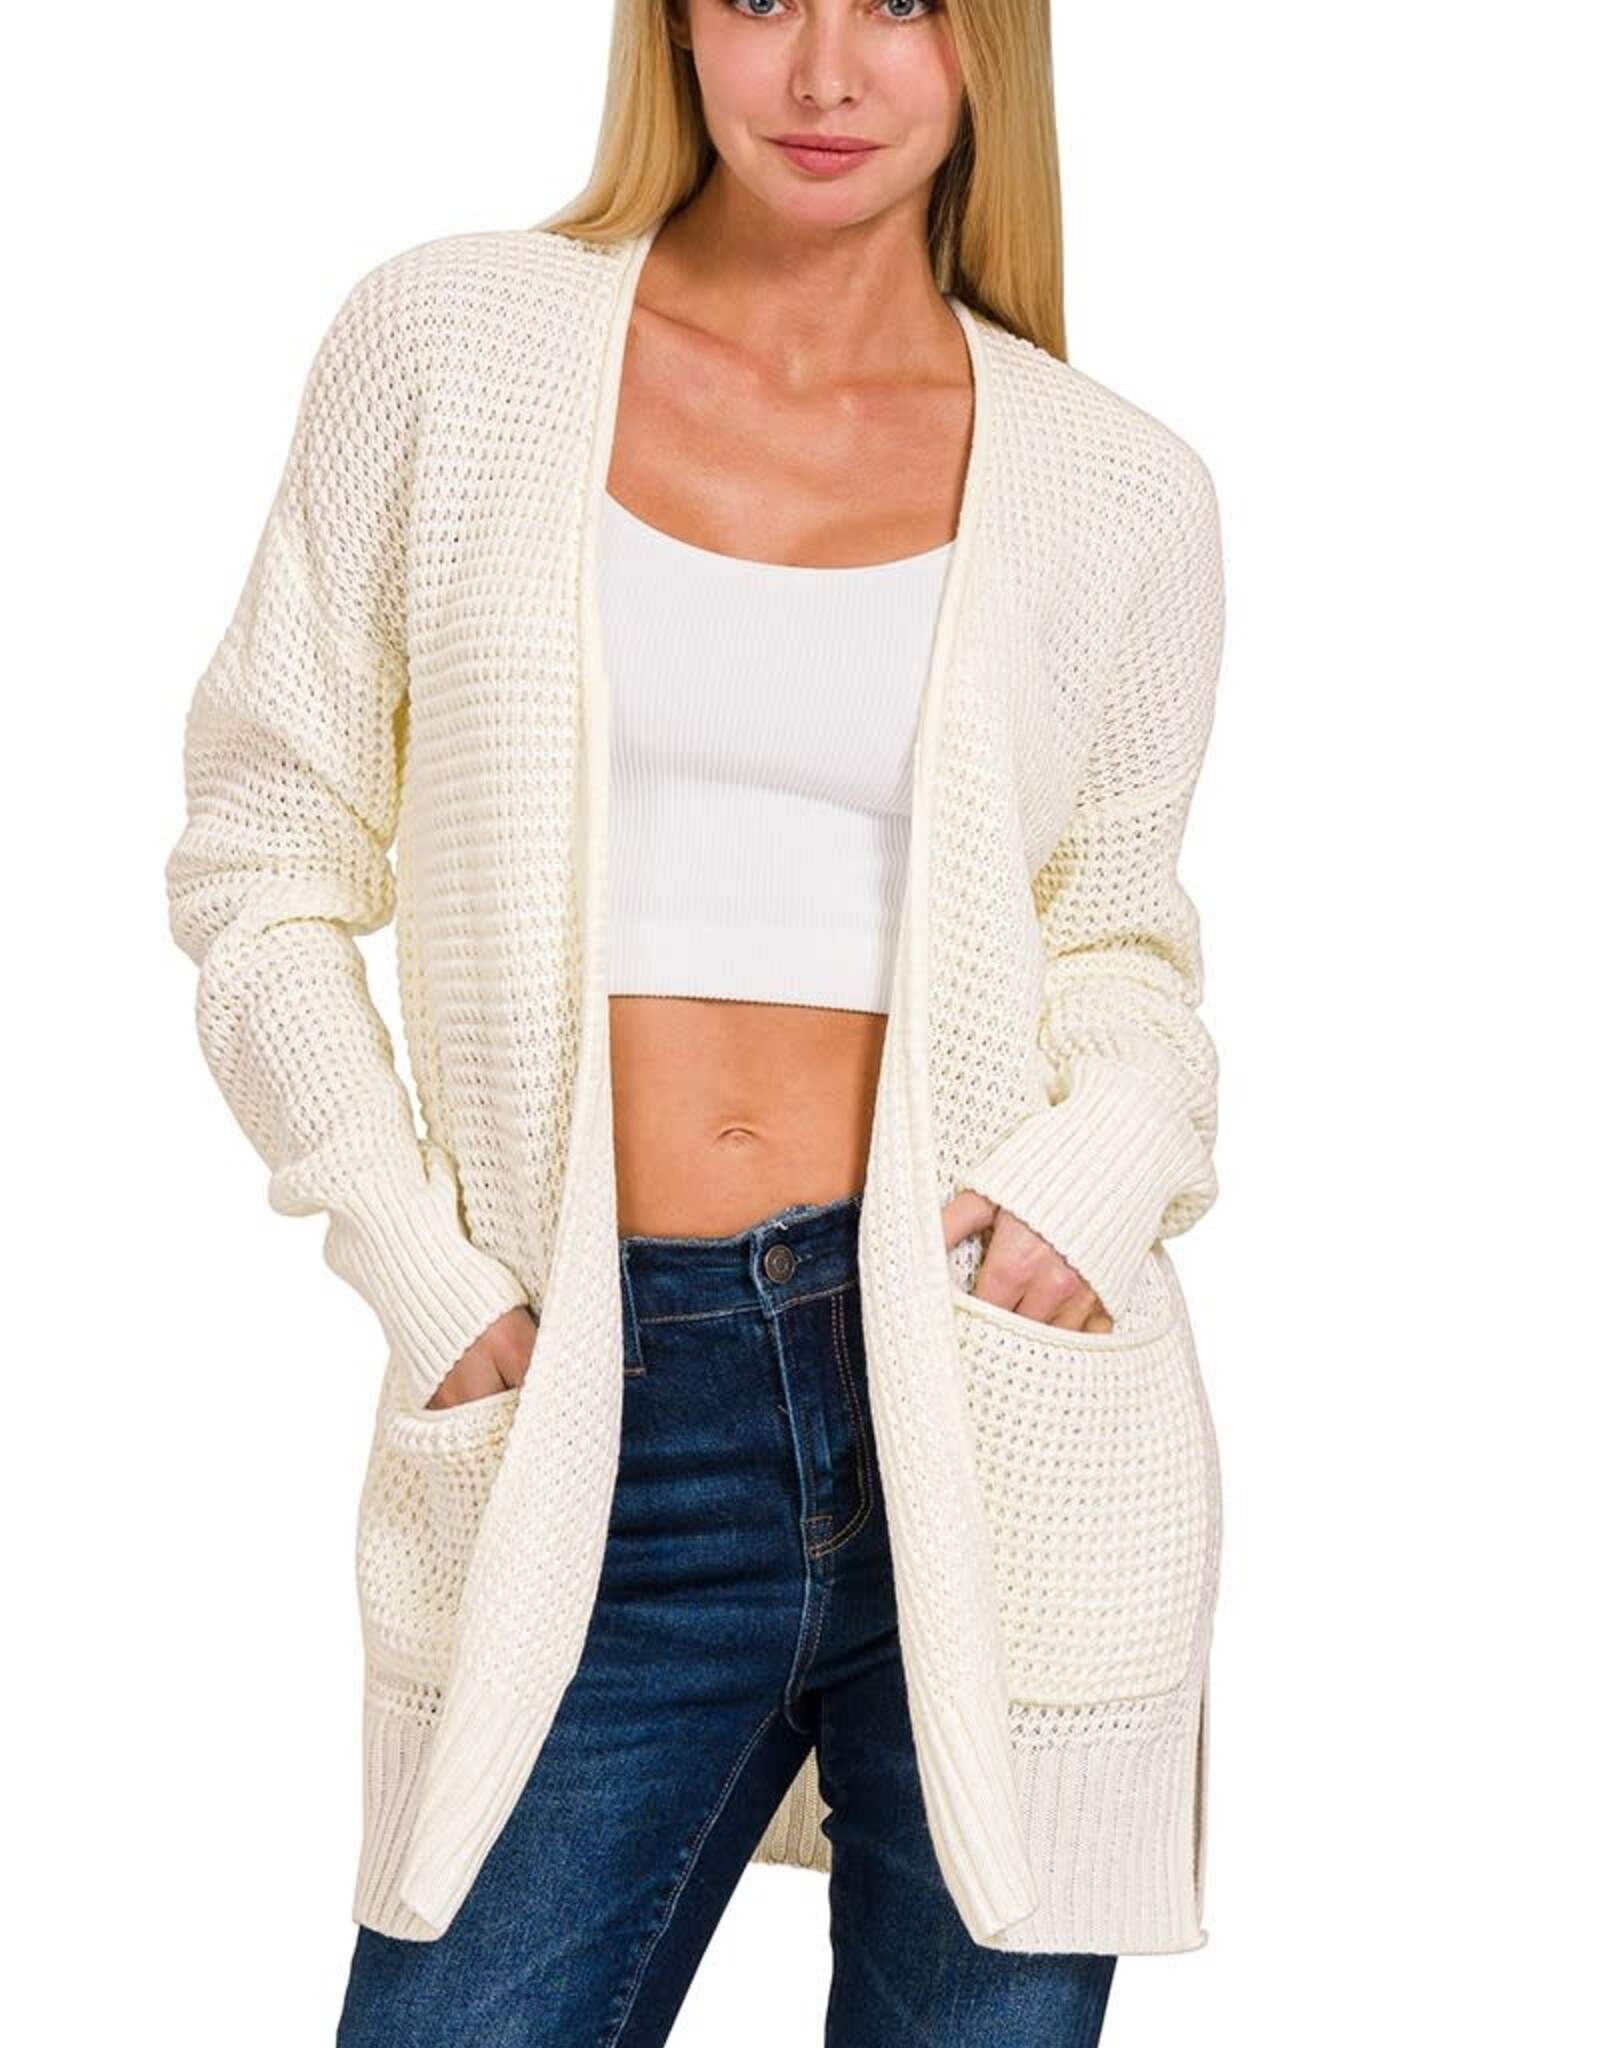 Miss Bliss Relaxed Midweight Waffle Cardigan W Pockets